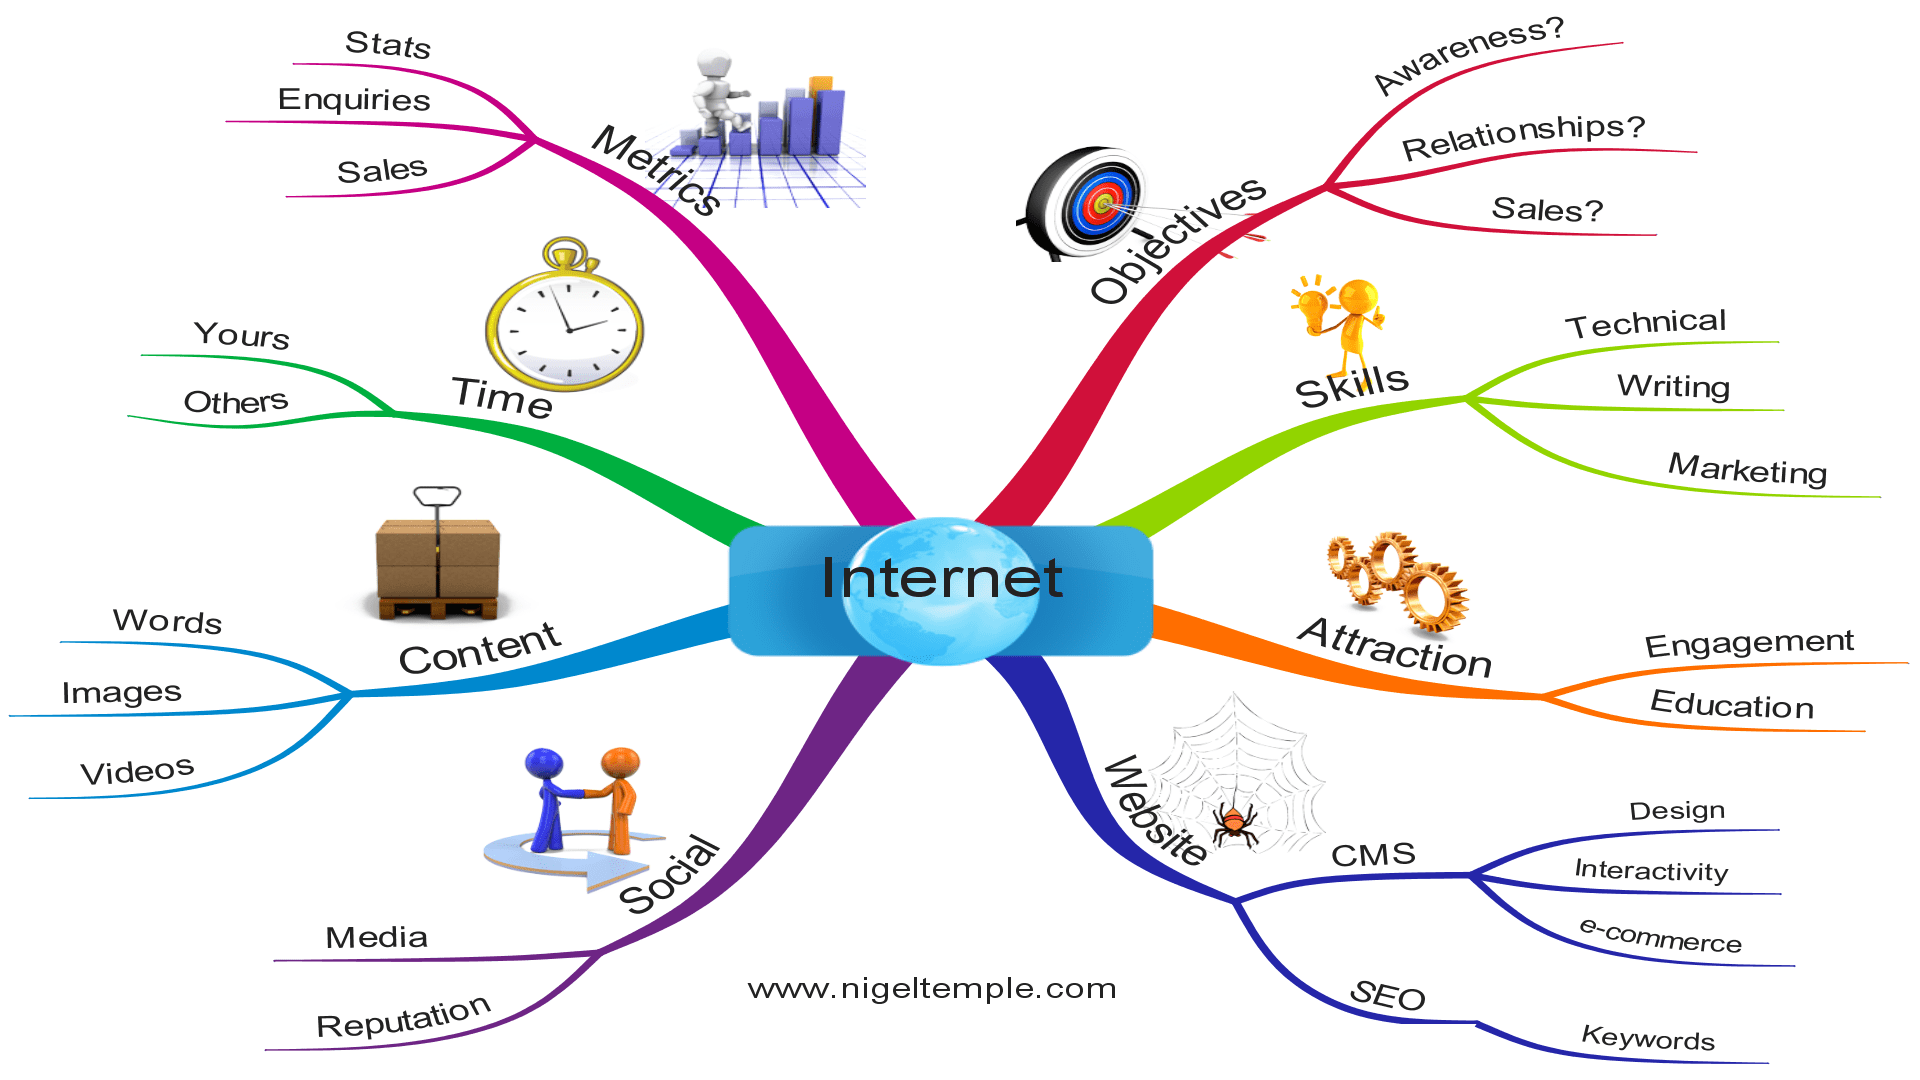 Mind Map which shows the key elements of internet marketing strategy ...